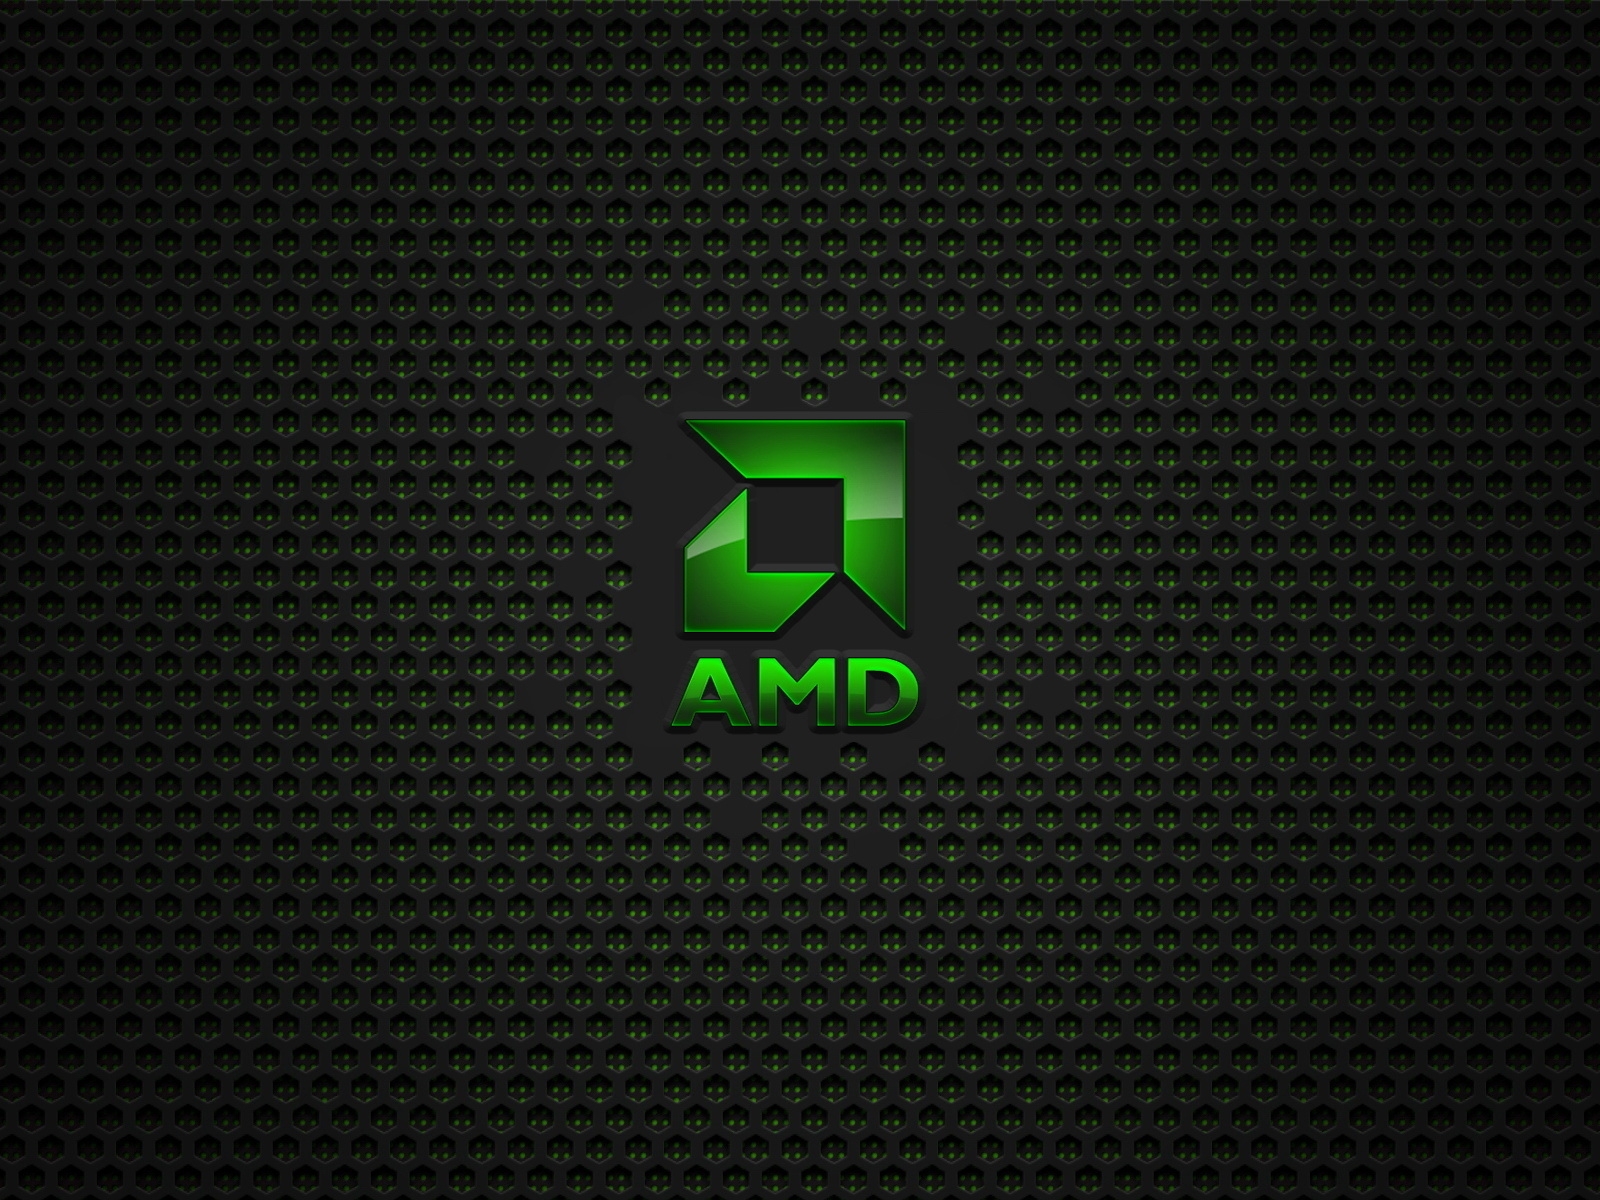 AMD for 1600 x 1200 resolution